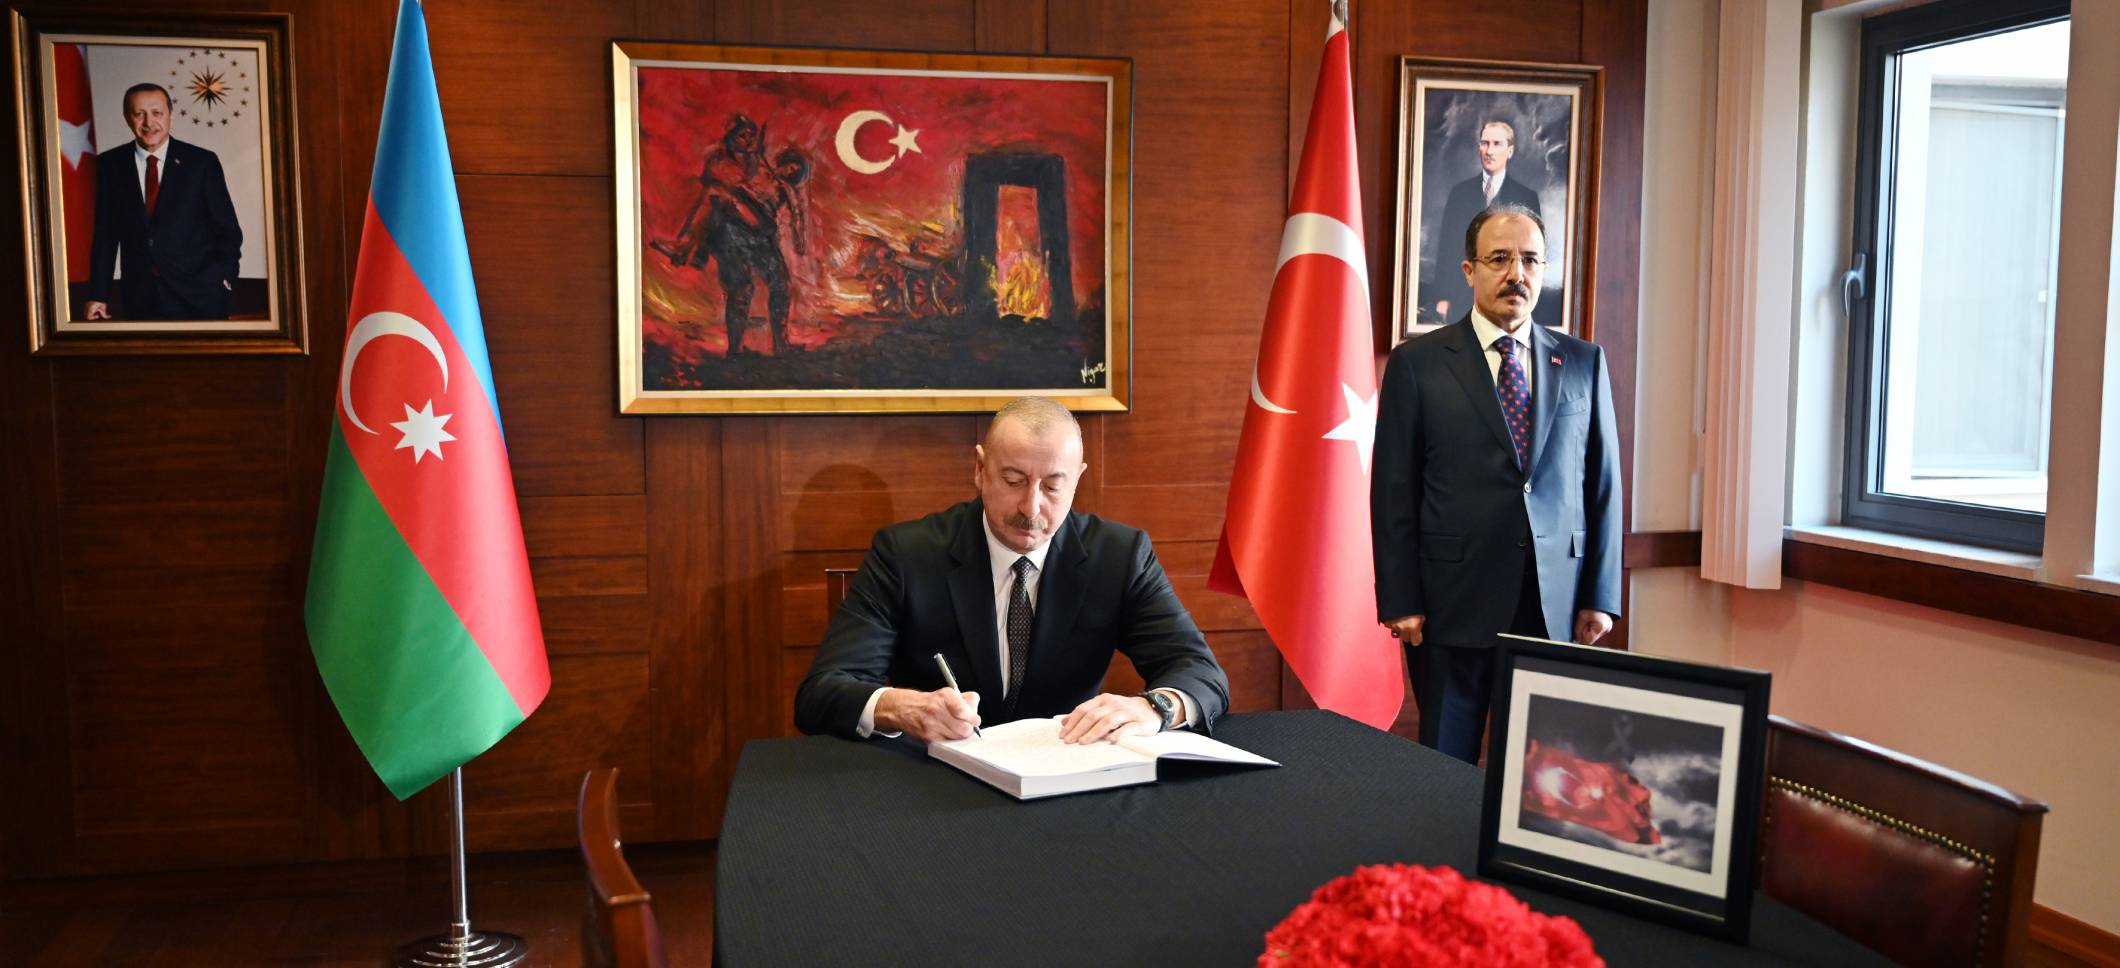 Ilham Aliyev visited the embassy of Türkiye in Azerbaijan, and expressed condolences over heavy losses